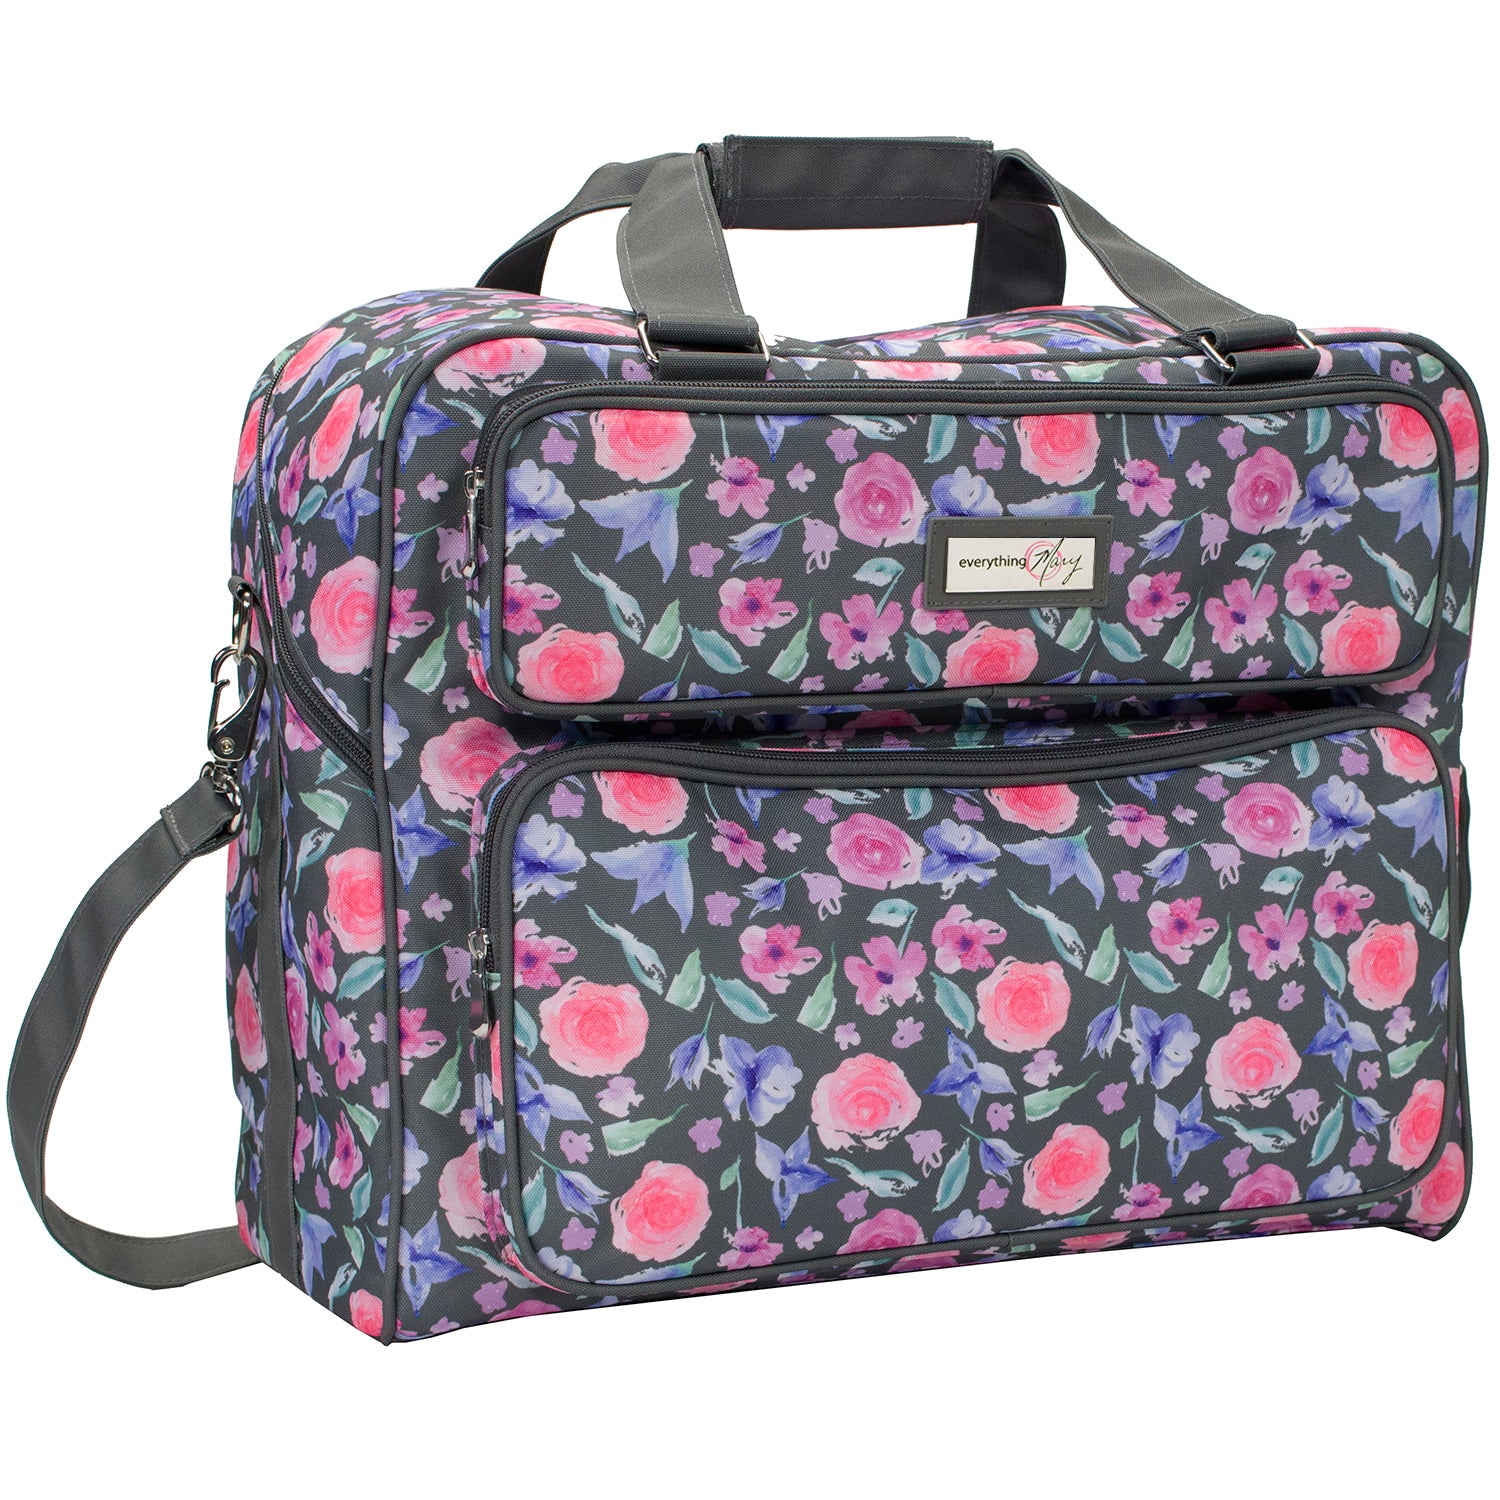 Everything Mary Collapsible Teal Floral Print Rolling Sewing Machine Tote